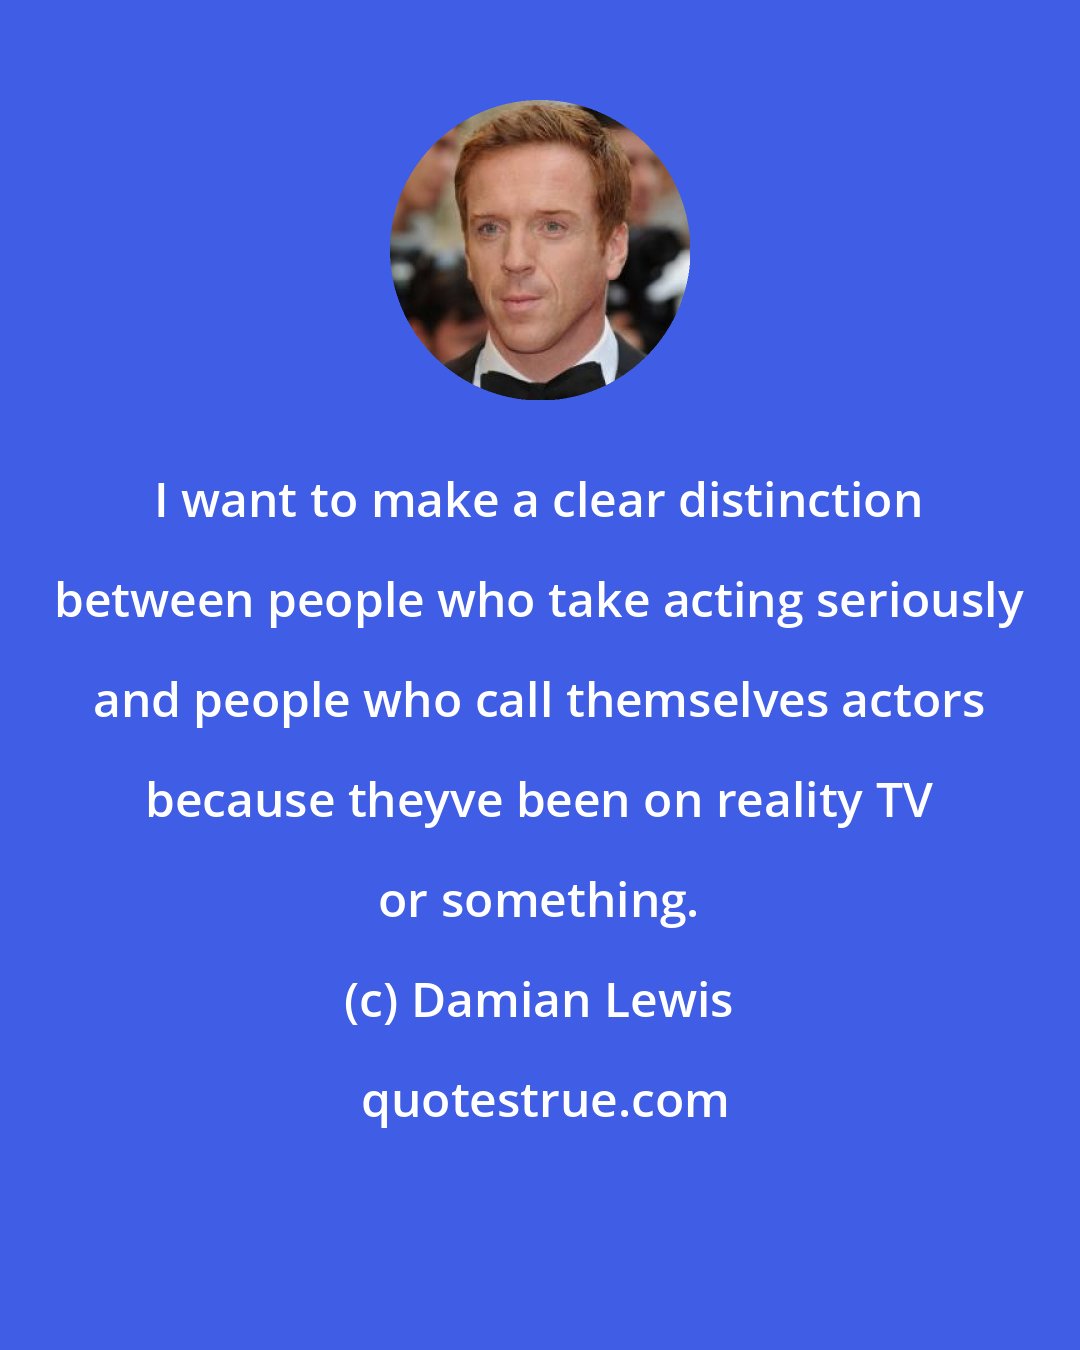 Damian Lewis: I want to make a clear distinction between people who take acting seriously and people who call themselves actors because theyve been on reality TV or something.